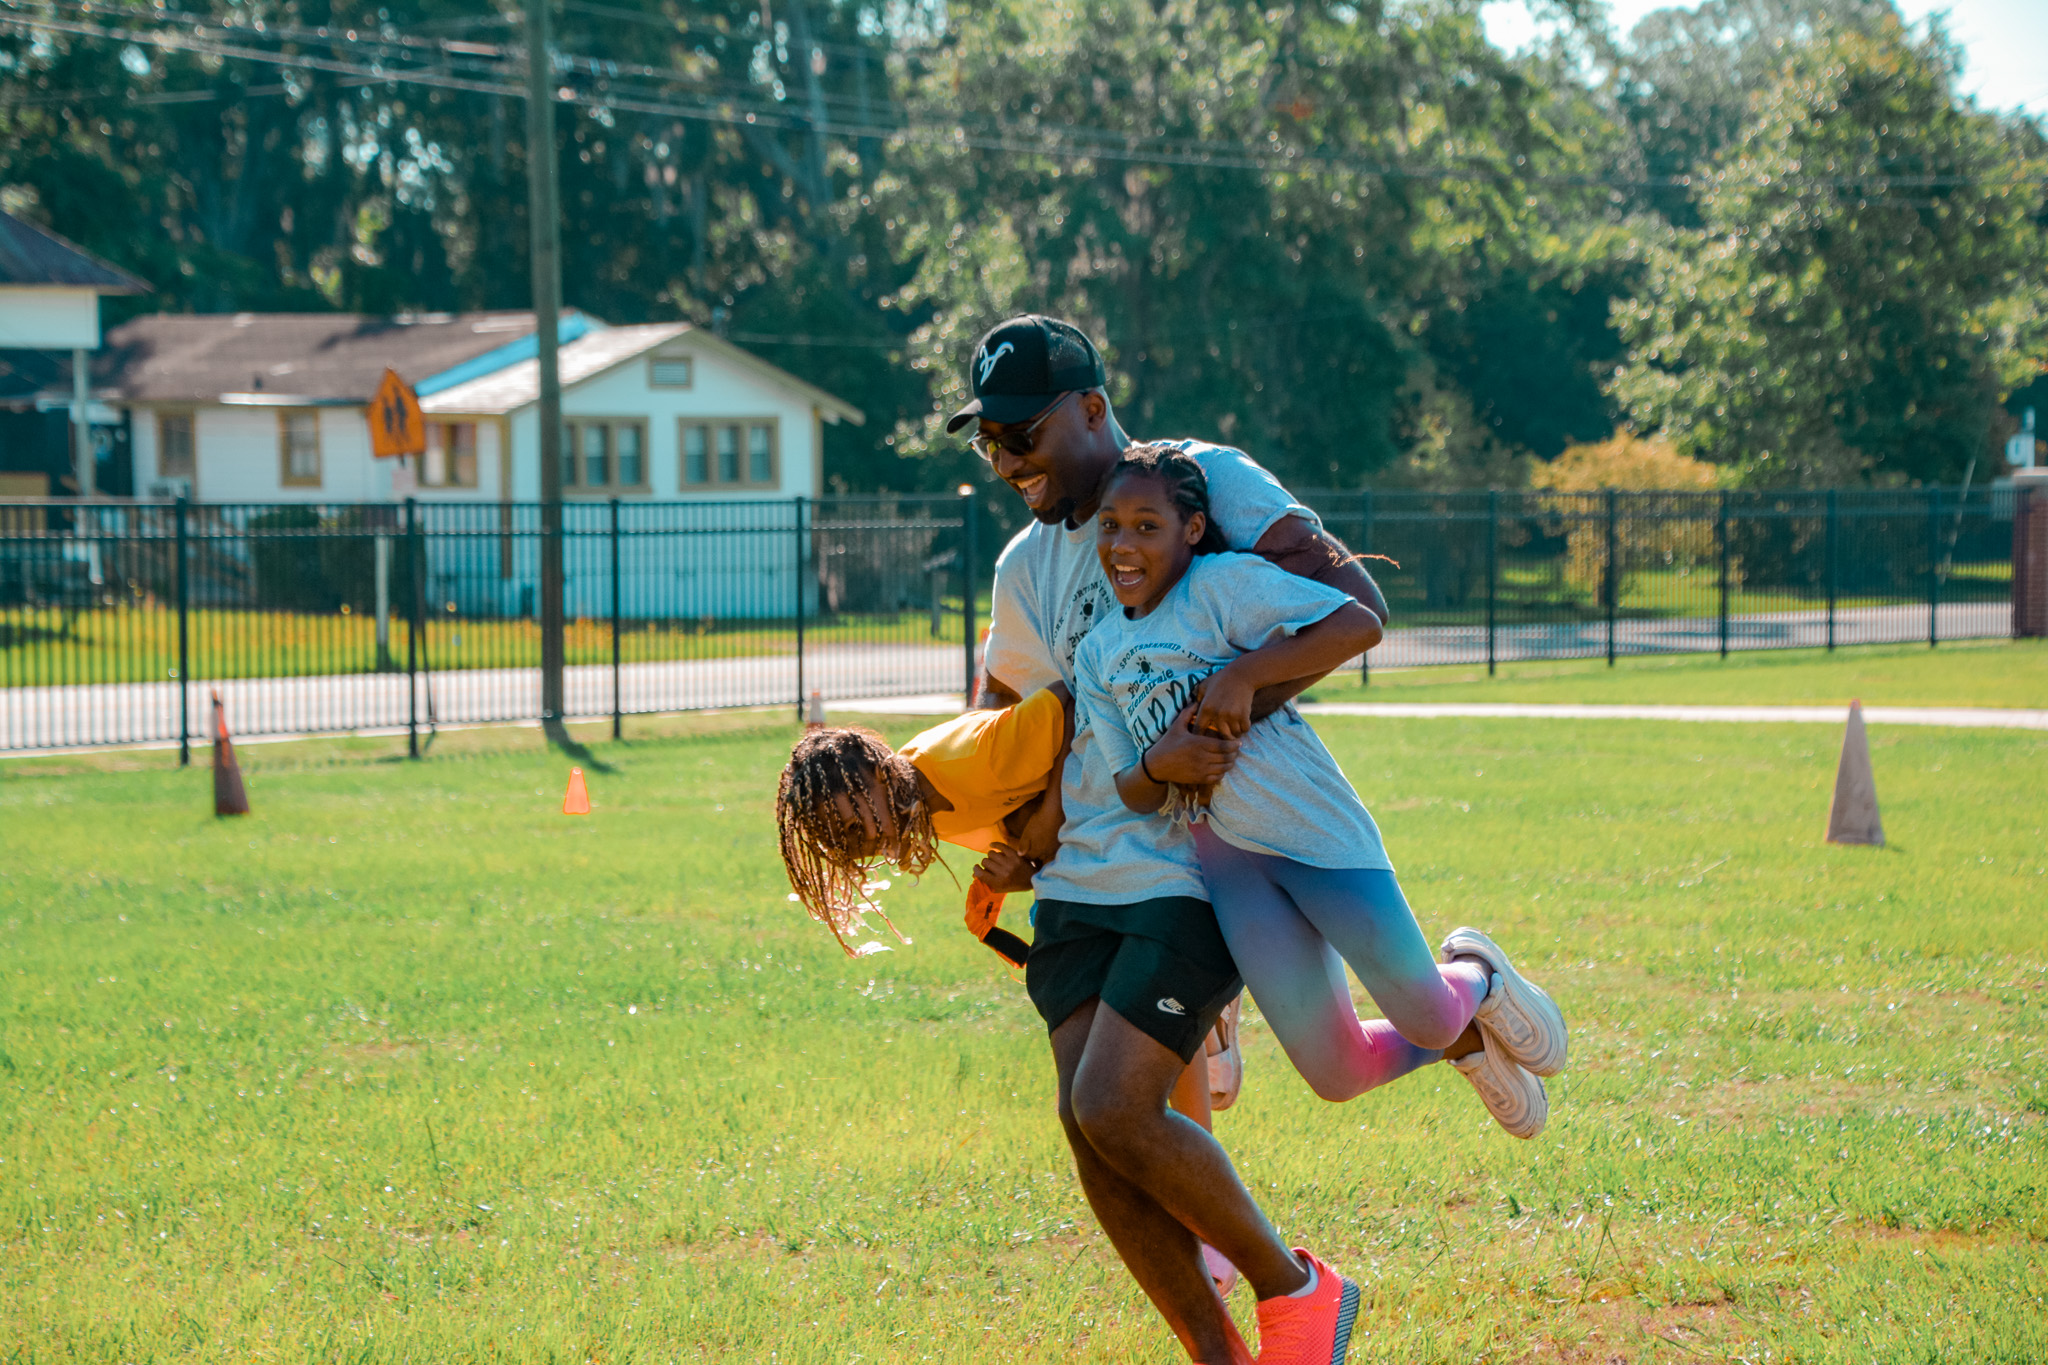 Teacher carrying students during a game at field day